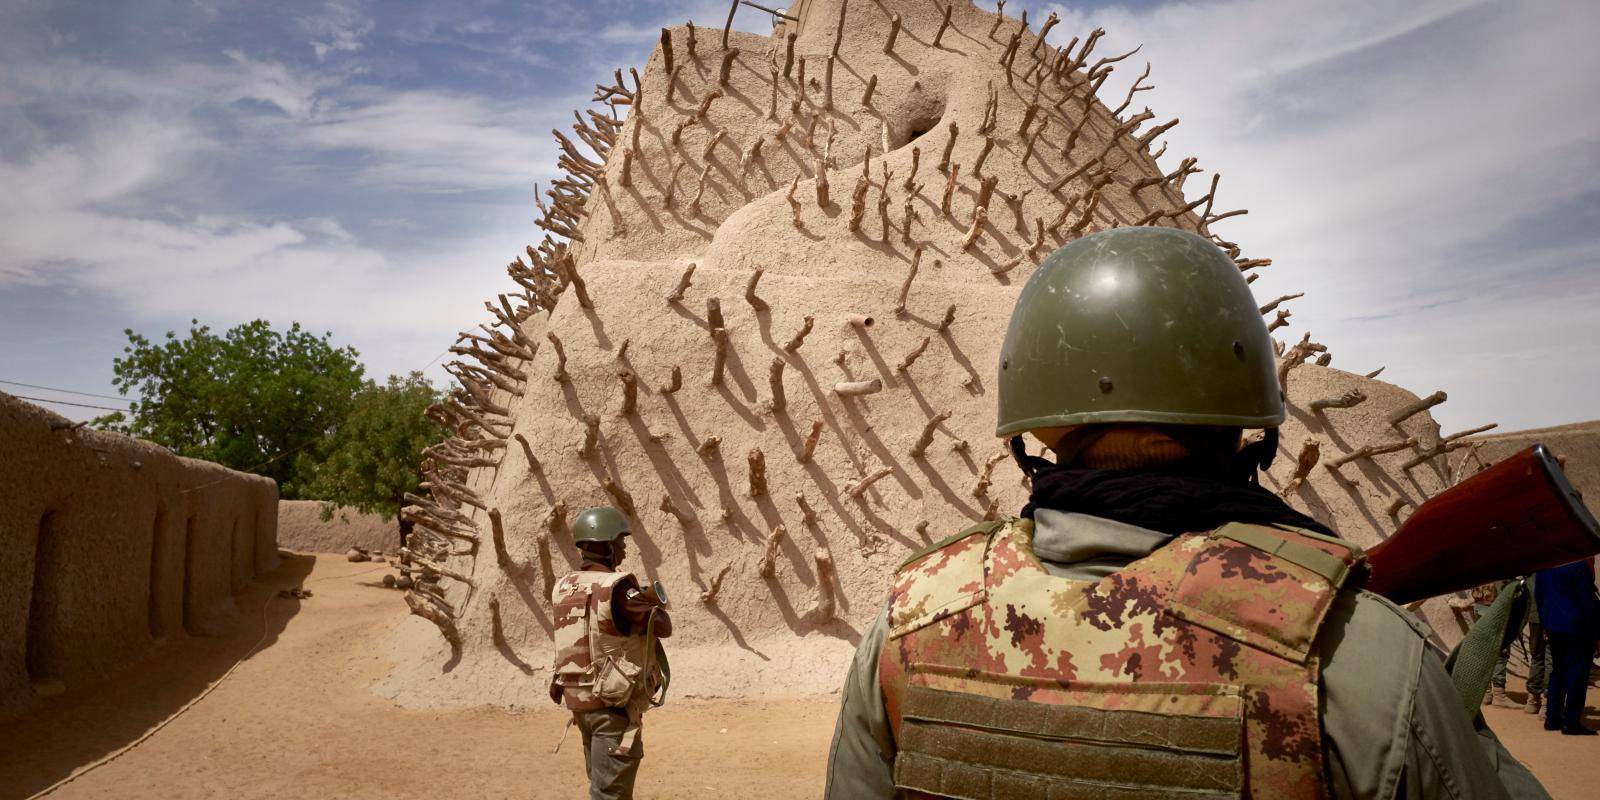 Soldiers patrol the site of the Tomb of Askia in Gao, Mali